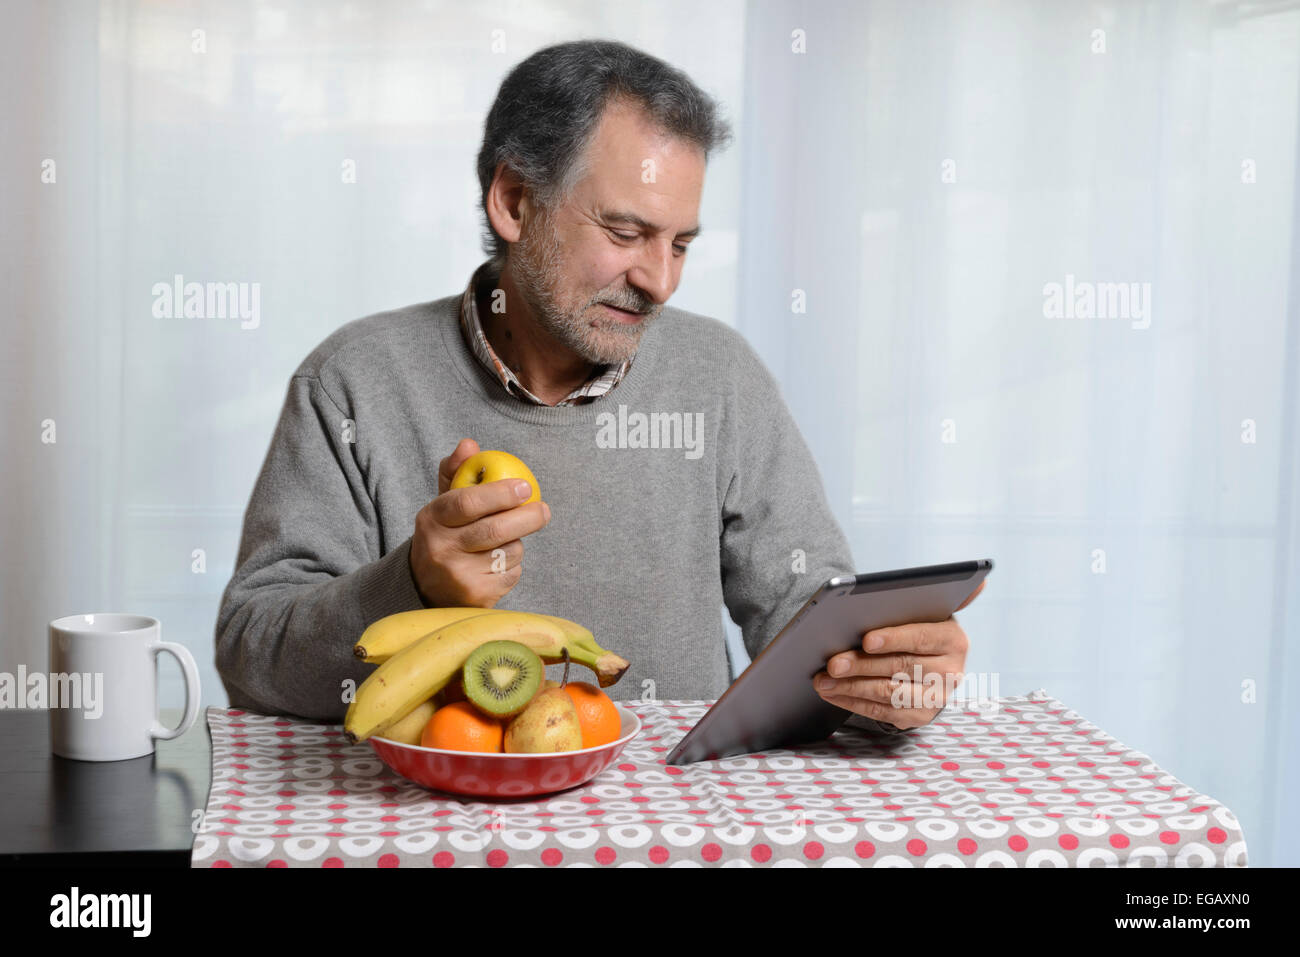 Middle aged man using an Apple iPad while eating fruit for breakfast in the kitchen at home Stock Photo